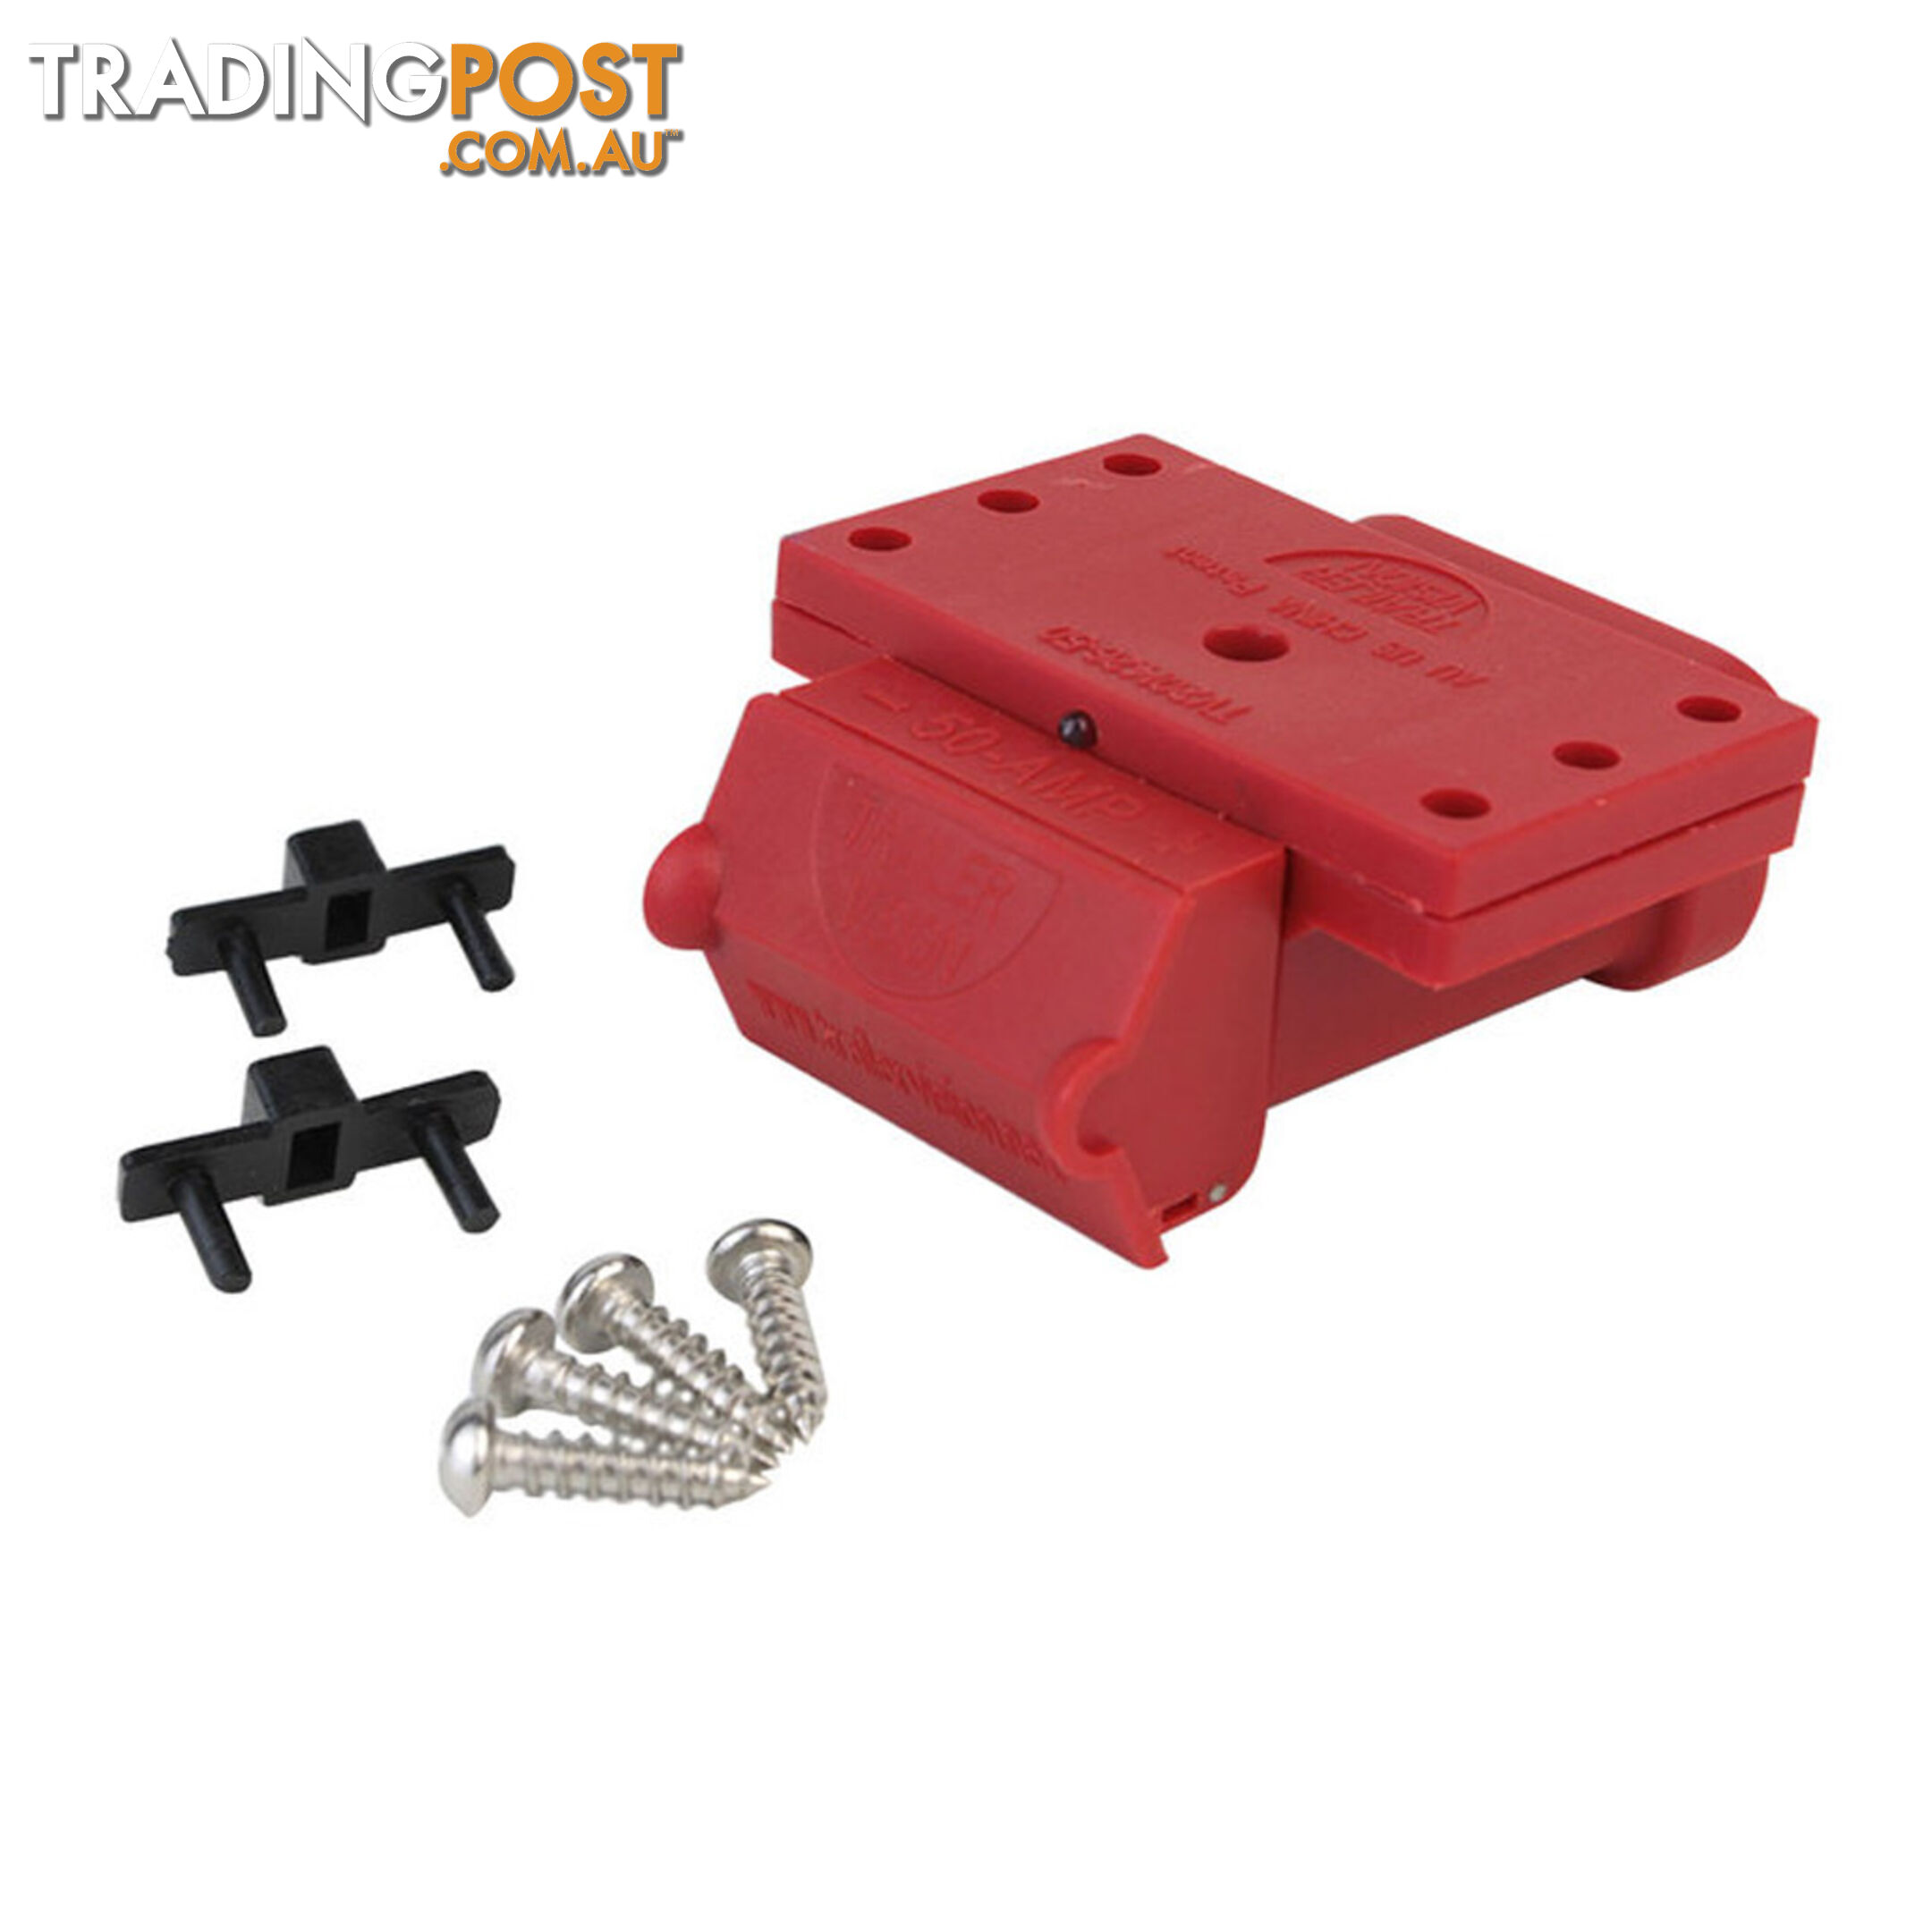 50A Anderson Plug Mounting Kit Red Connector Cover Assembly with LED SKU - TV-201426-50R